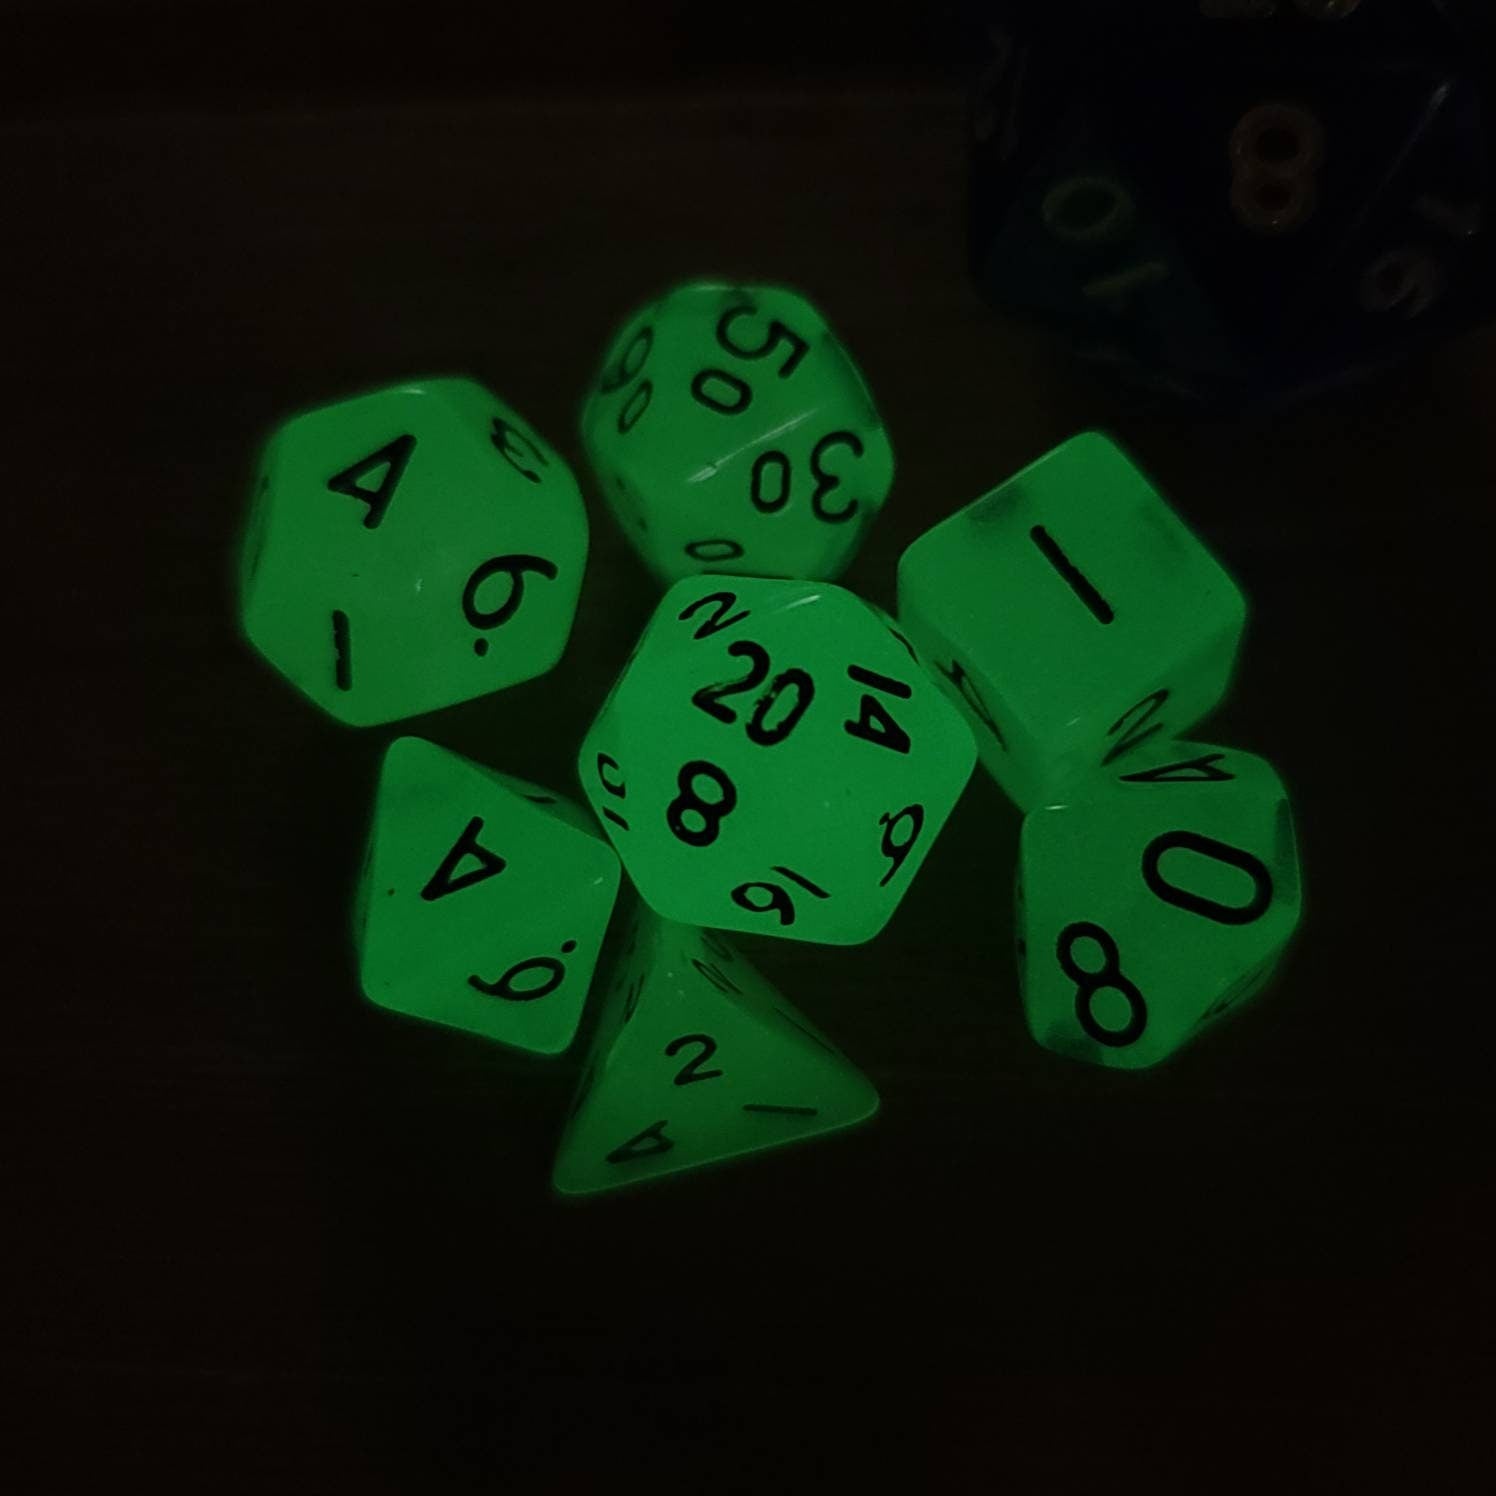 Mini Glow In The Dark Dice - Red Tint | RPG Dice Set| RPG Dice | Polyhedral Dice Set | Dungeons and Dragons | DnD Dice Set | Gaming Dice Set